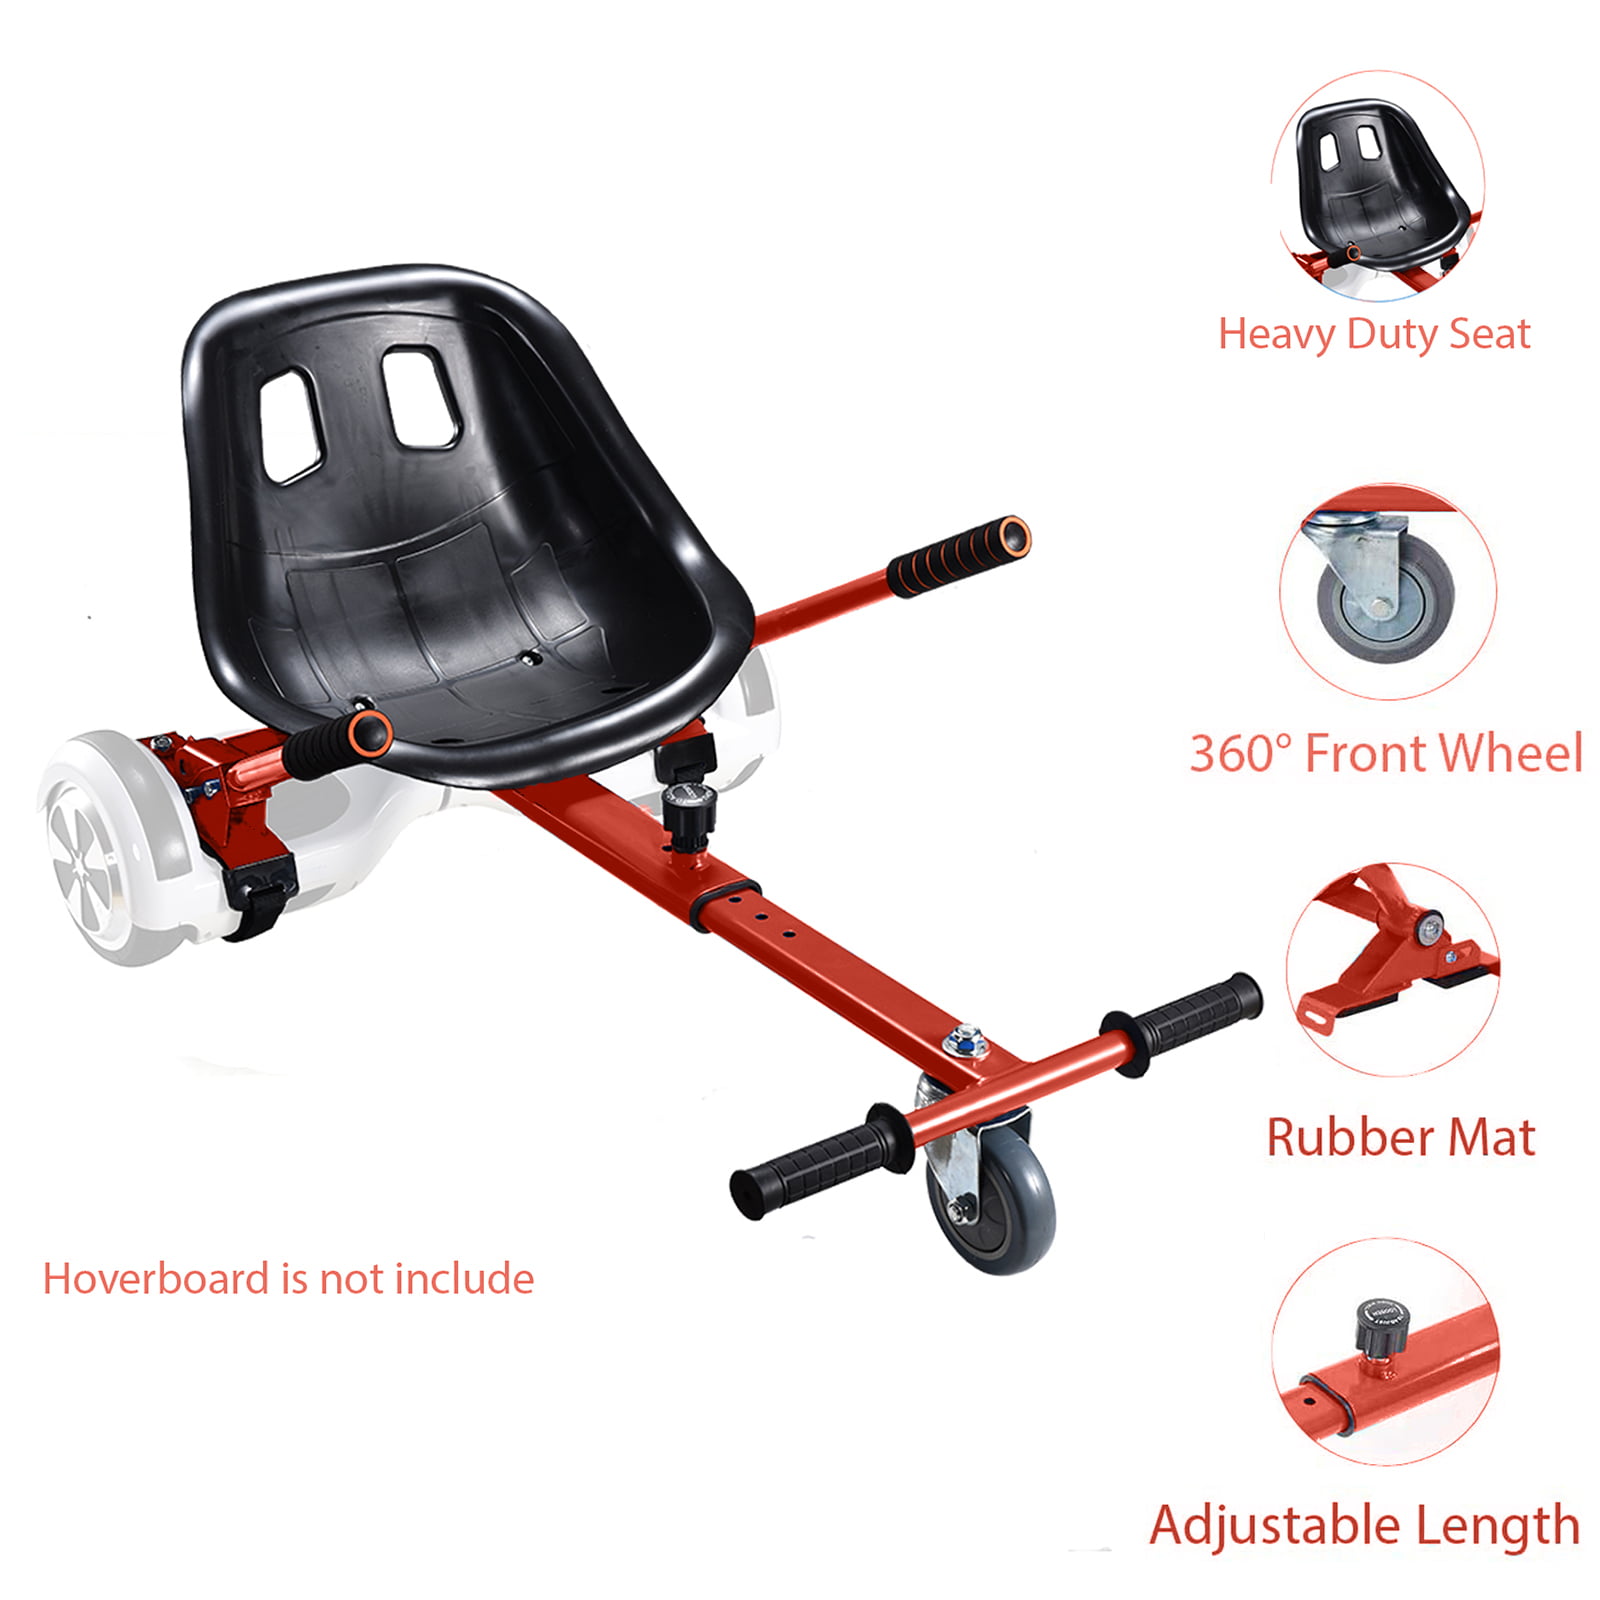 Go Kart Accessory for 6.5 8 10 Two Wheels Hoverboard CBD Hoverboard Seat Attachment Self Balancing Scooter Hover Board with Seat for Kids.